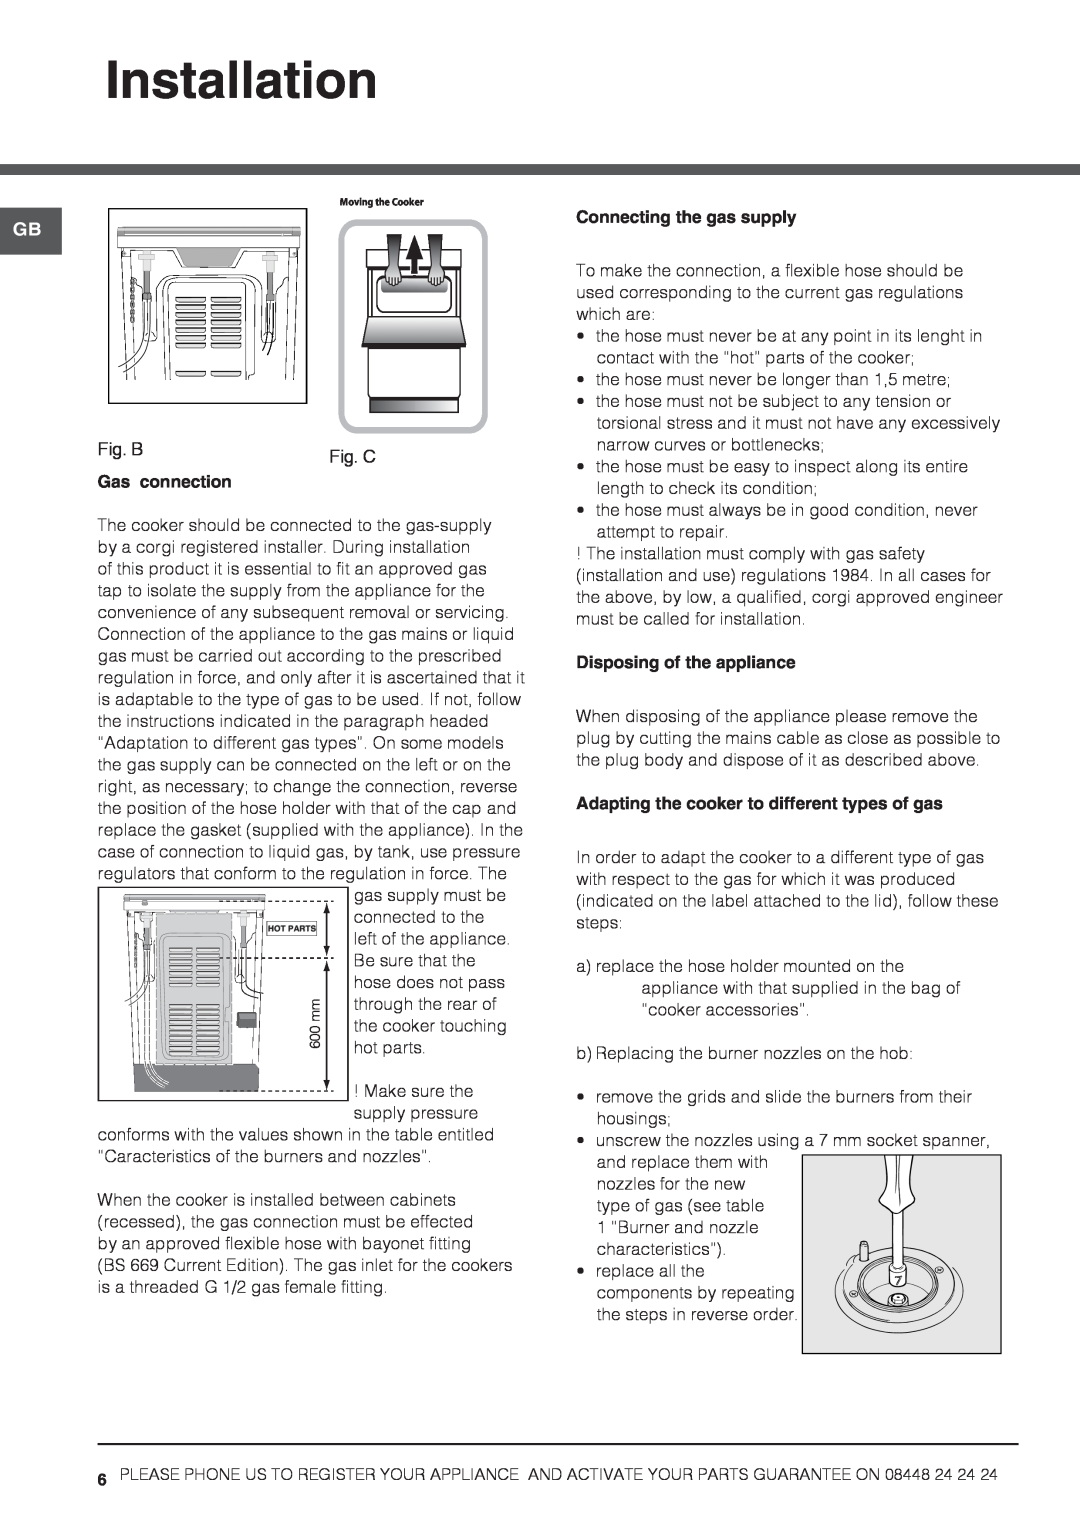 Hotpoint HAGL 51 P, HAGL 51 K Installation, Fig. B, Gas connection, Connecting the gas supply, Disposing of the appliance 